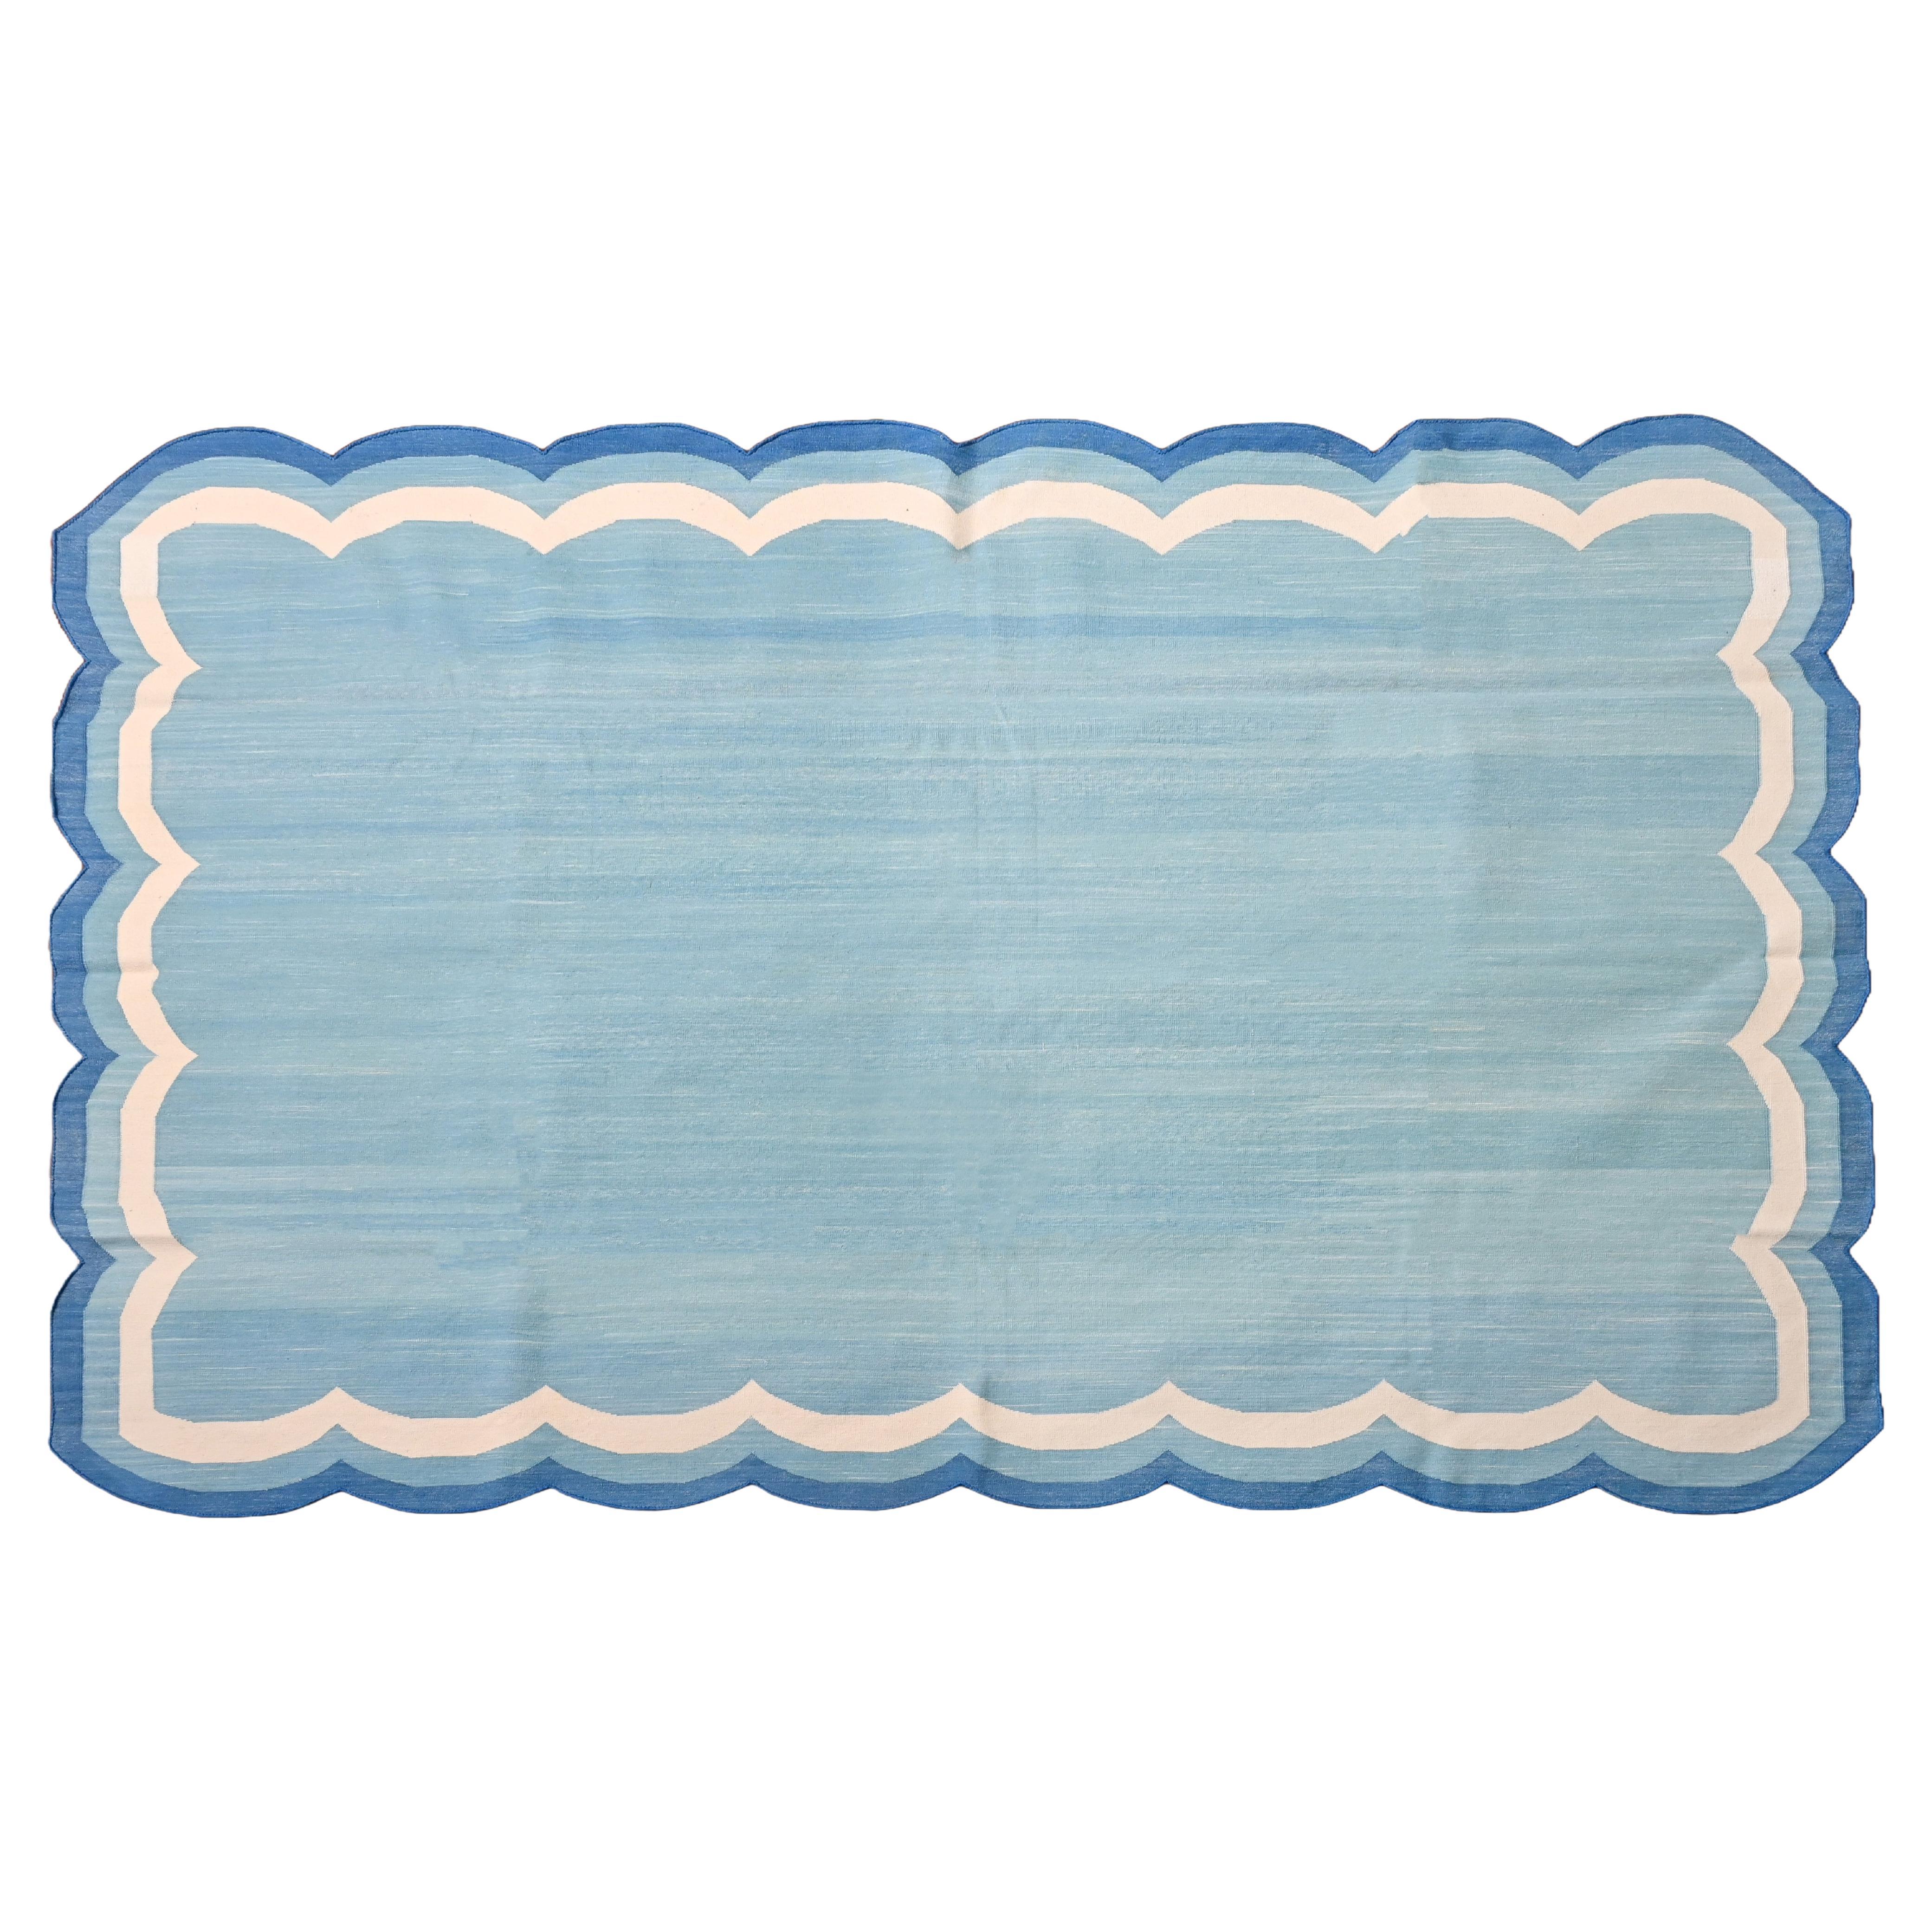 Handmade Cotton Area Flat Weave Rug, Teal Blue And White Scallop Indian Dhurrie For Sale